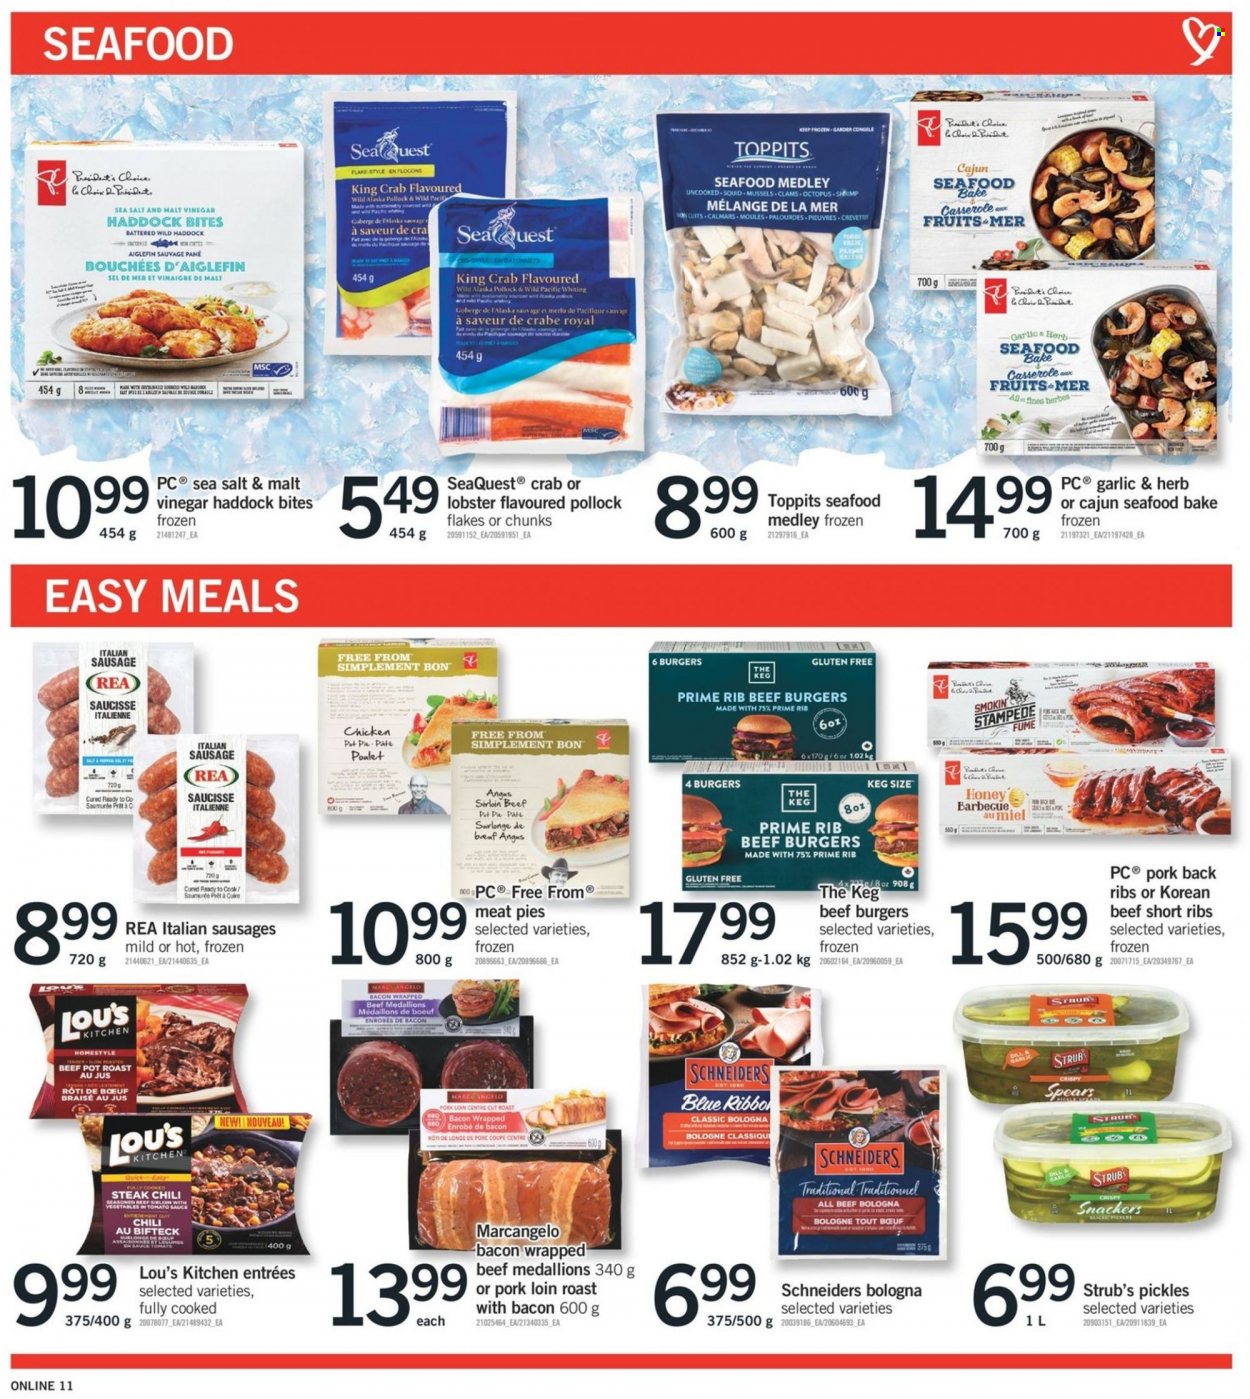 thumbnail - Fortinos Flyer - February 02, 2023 - February 08, 2023 - Sales products - pie, pot pie, clams, mussels, squid, haddock, king crab, pollock, octopus, seafood, crab, whiting, hamburger, beef burger, bologna sausage, sausage, italian sausage, Président, sea salt, pickles, dill, vinegar, honey, beef meat, beef ribs, beef sirloin, ribs, pork loin, pork meat, pork ribs, pork back ribs, pot, casserole, savage, steak. Page 11.